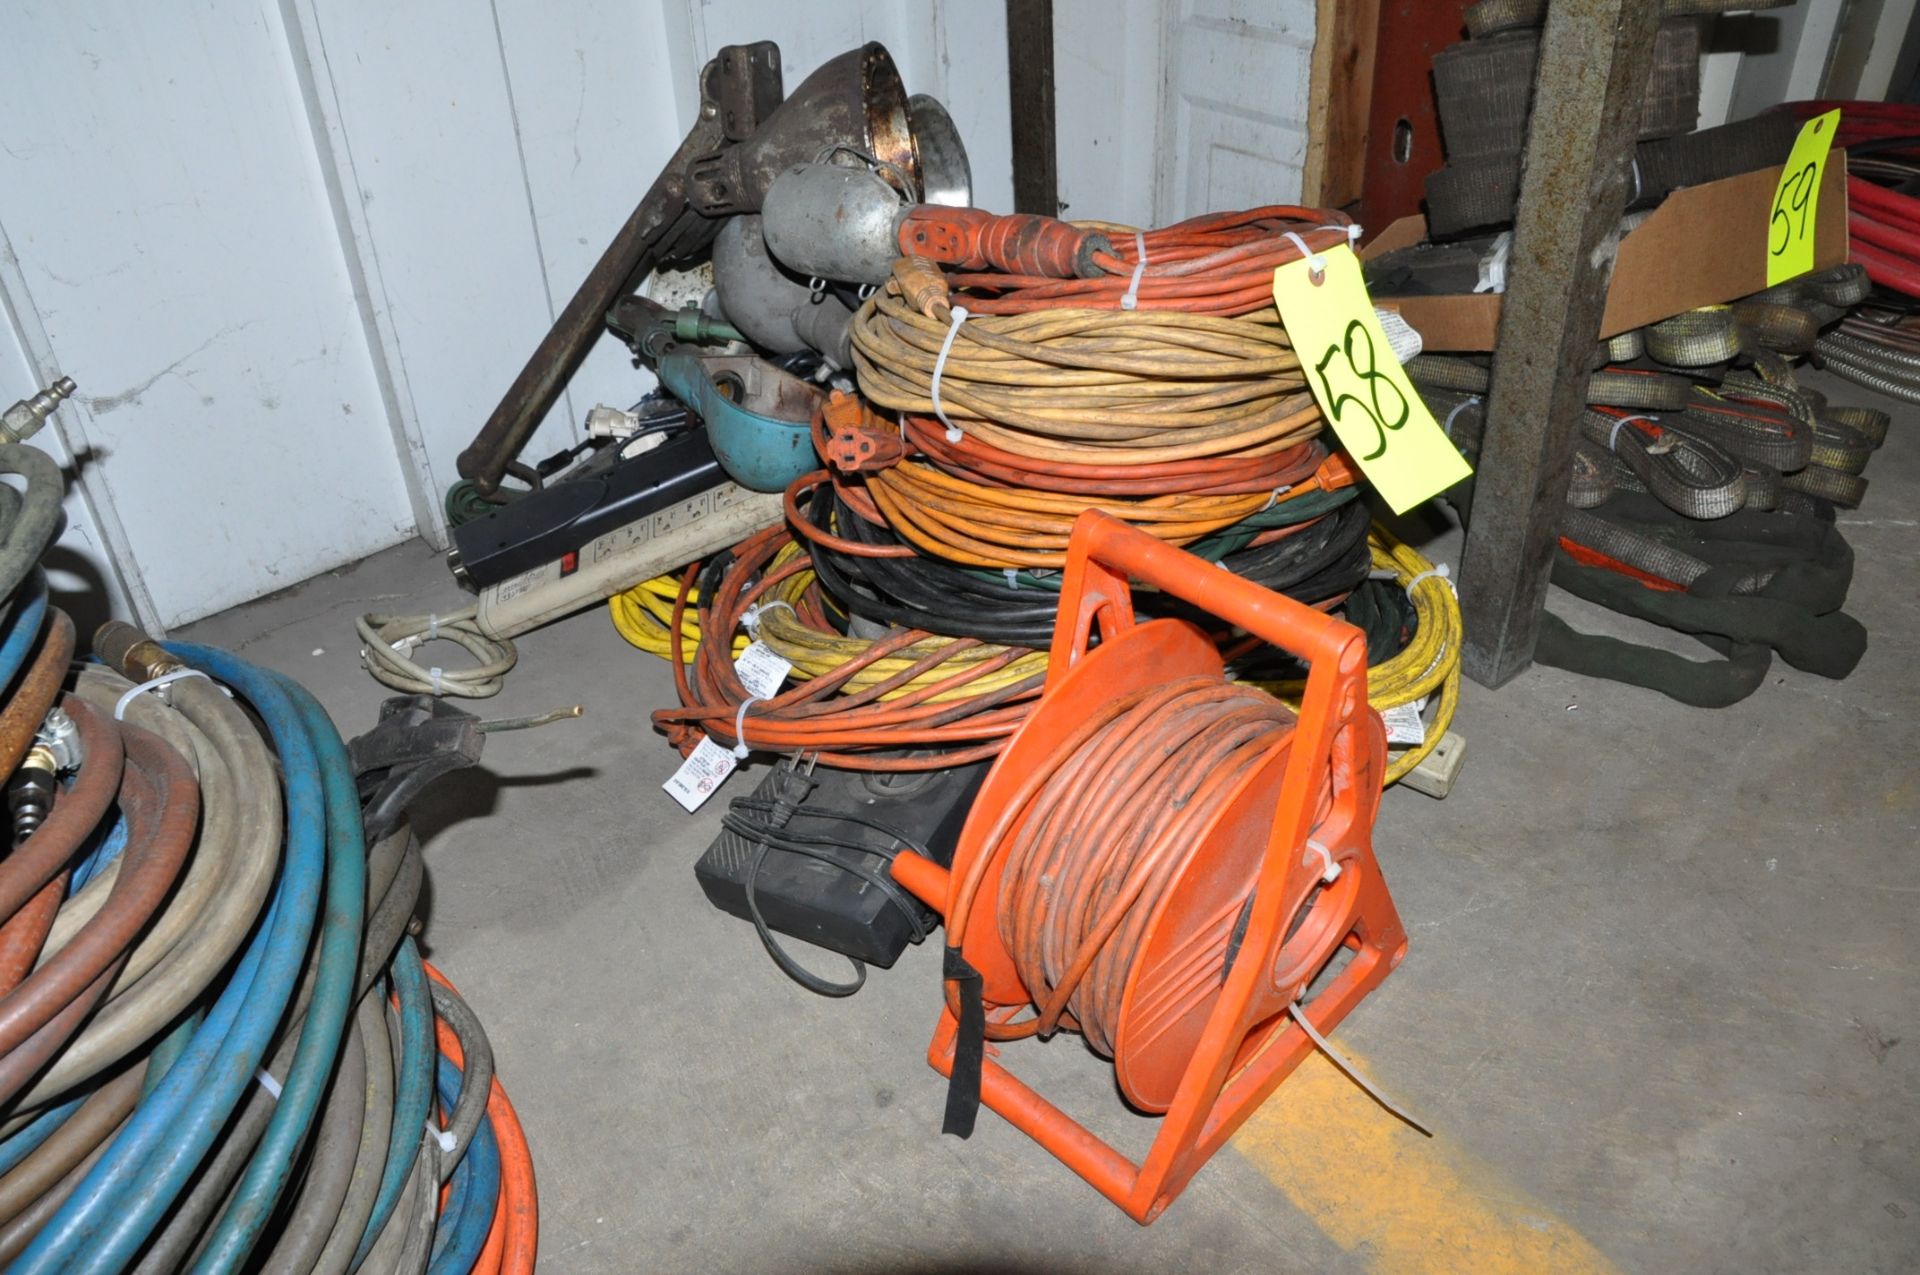 Lot-Extension Cords, Cord Reel, and Lights Under (1) Bench